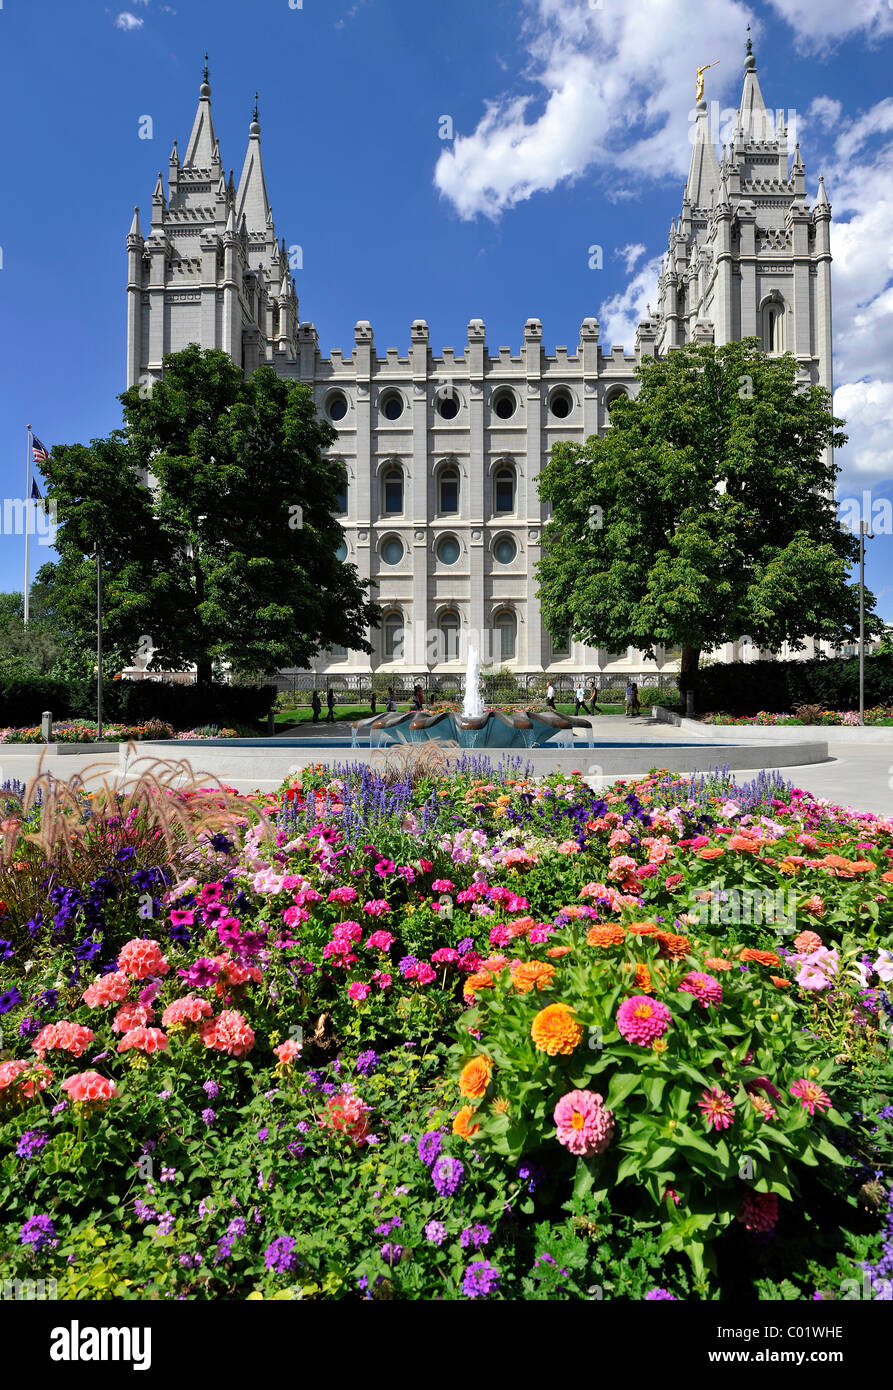 East side, Temple of The Church of Jesus Christ of Latter-day Saints, Church of Mormons, Temple Square, Salt Lake City, Utah Stock Photo